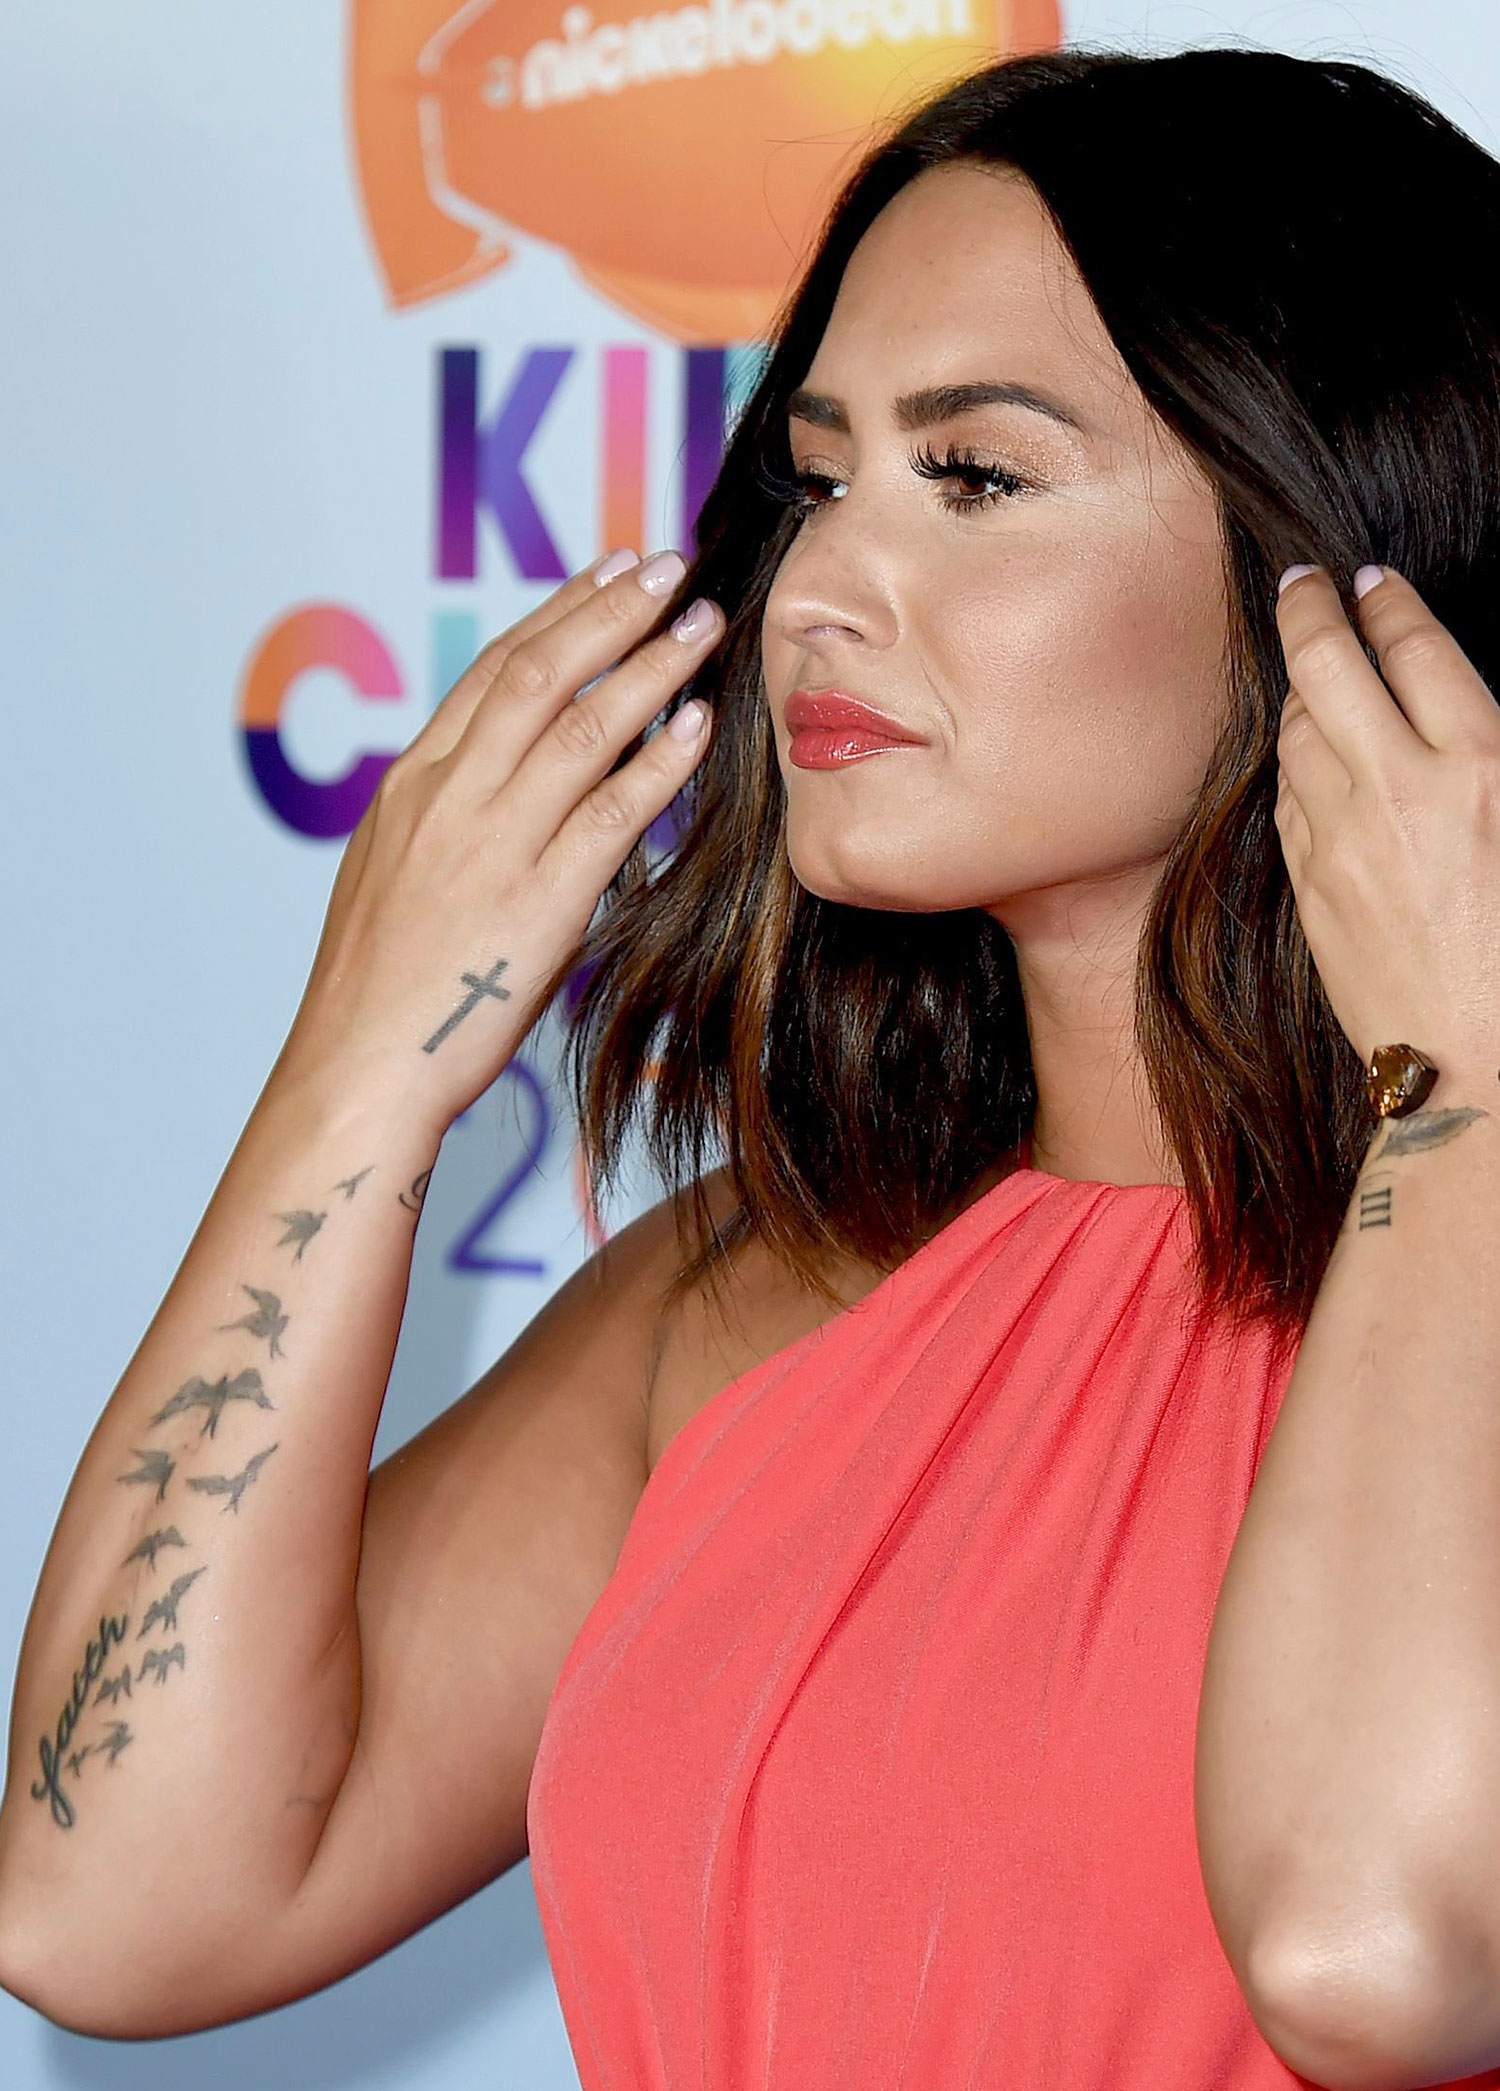 Demi Lovatos 20 Tattoos and Their Meanings A Complete Guide